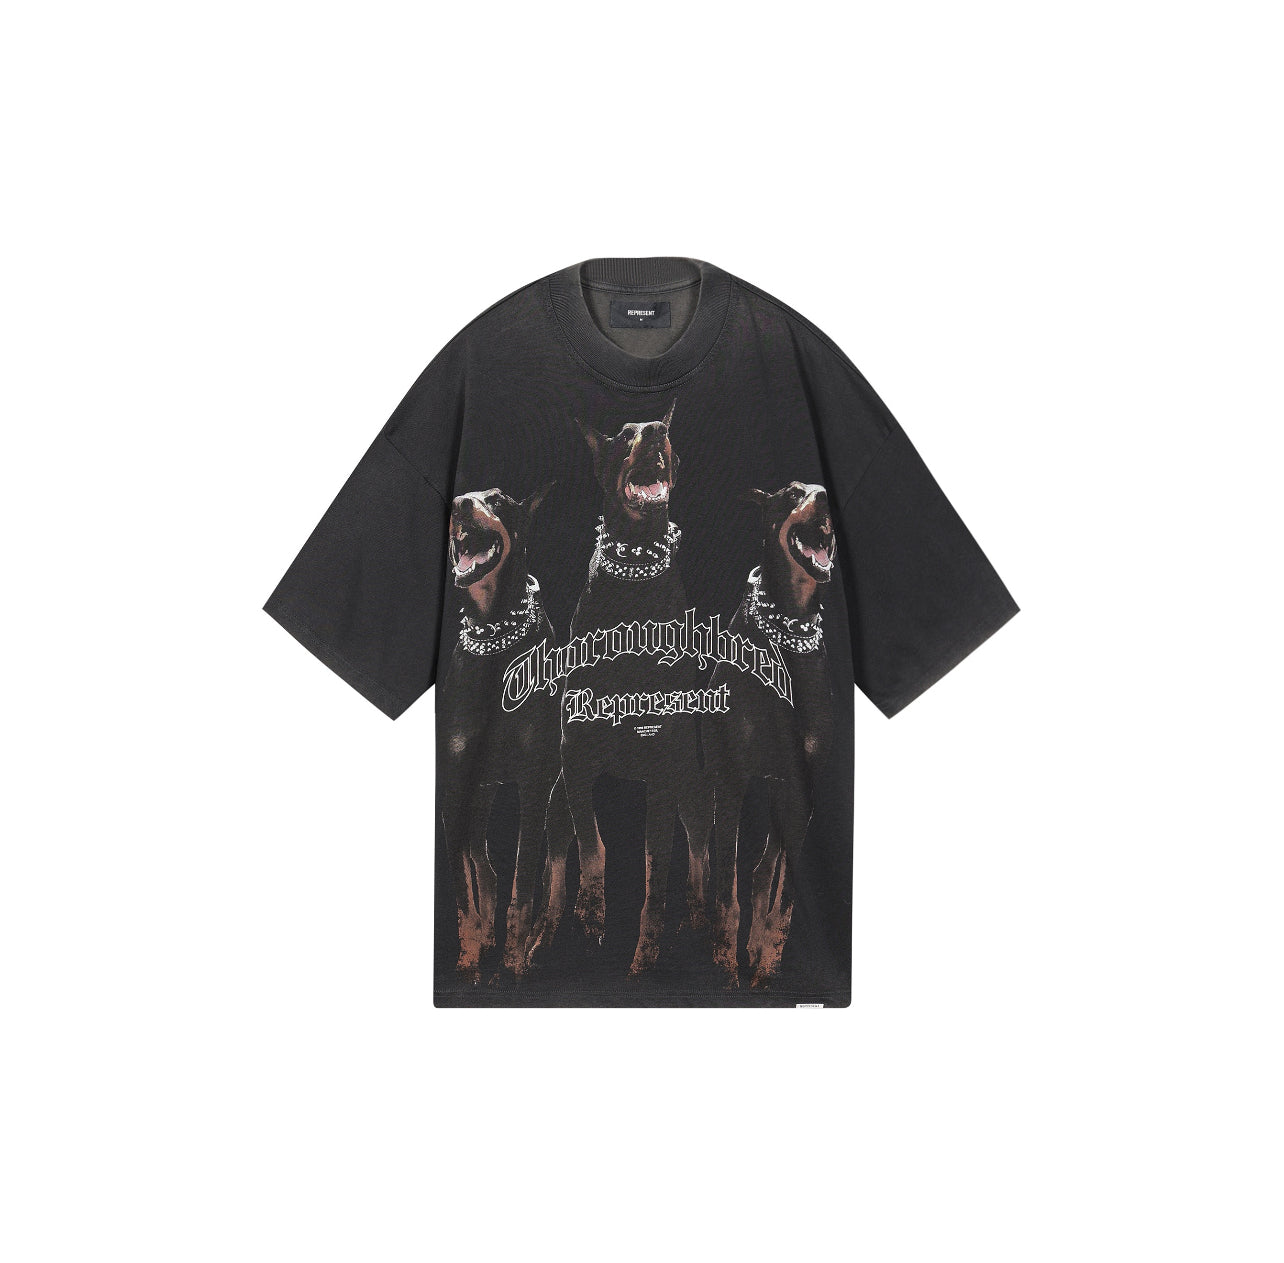 Represent Graphic Print Collection Oversized Tee